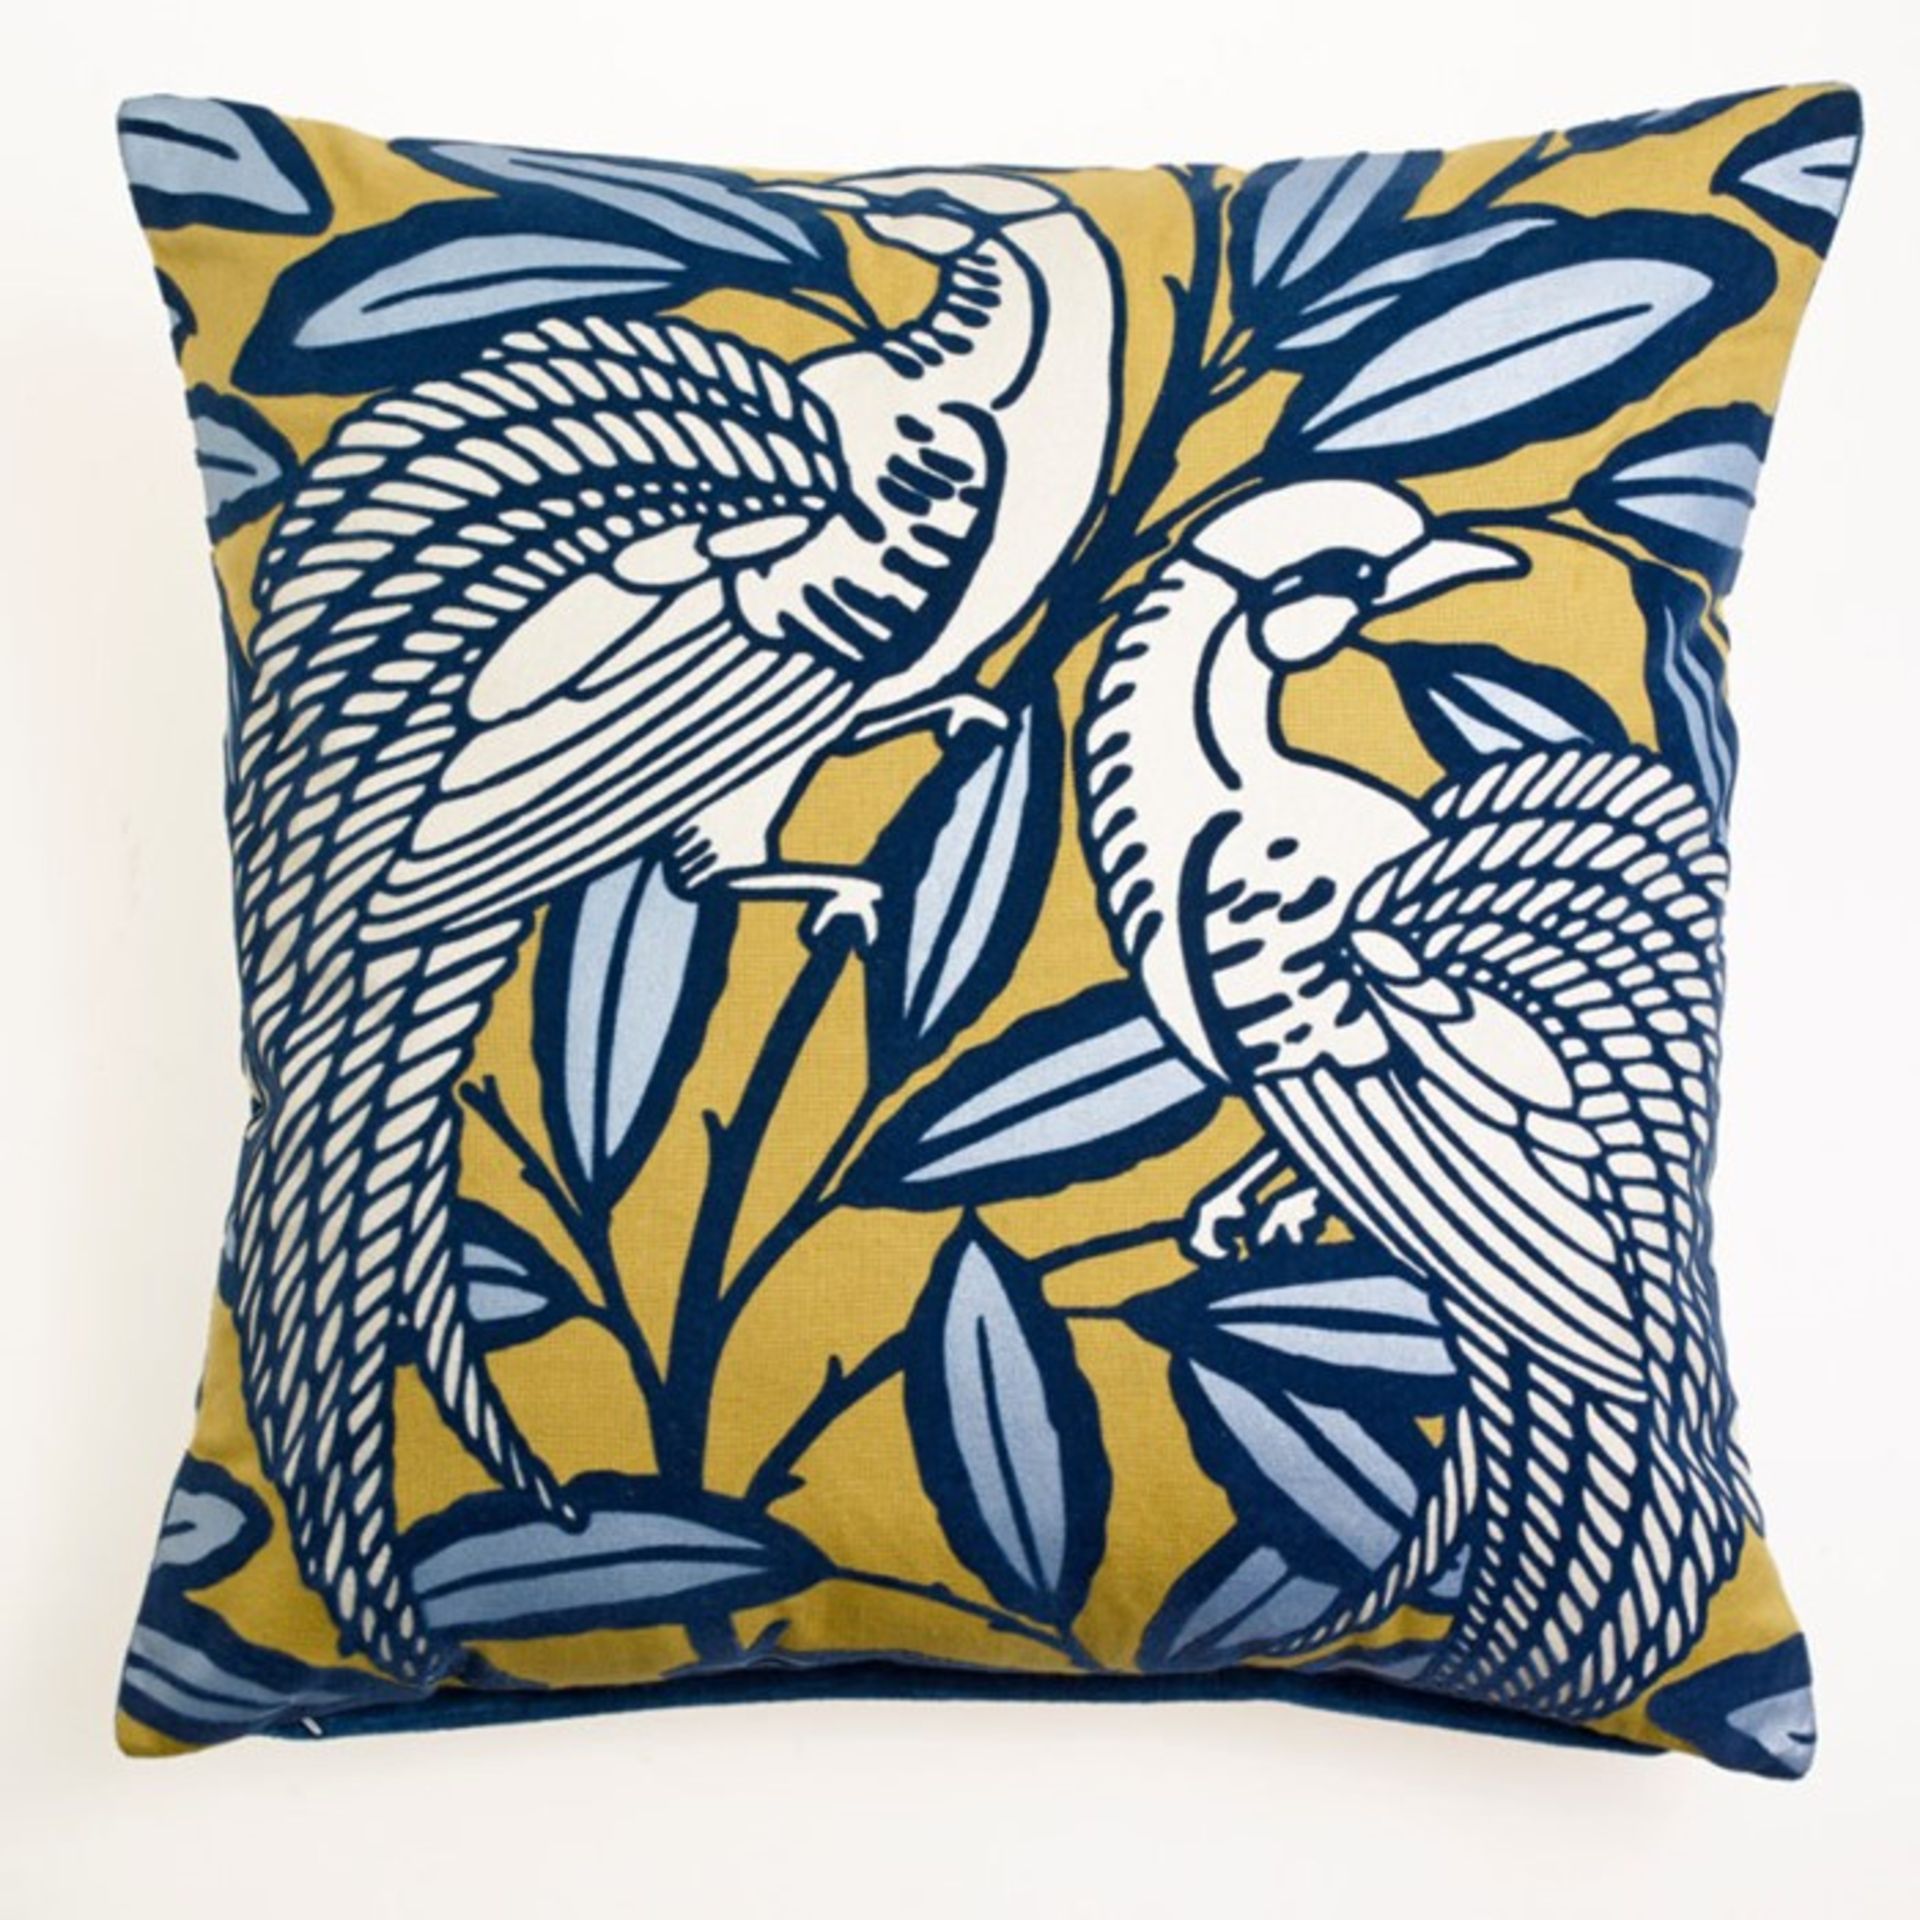 1 BRAND NEW PACKAGED ARTHOUSE TAILFEATHER MUSTARD CUSHION 300115 (VIEWING HIGHLY RECOMMENDED)